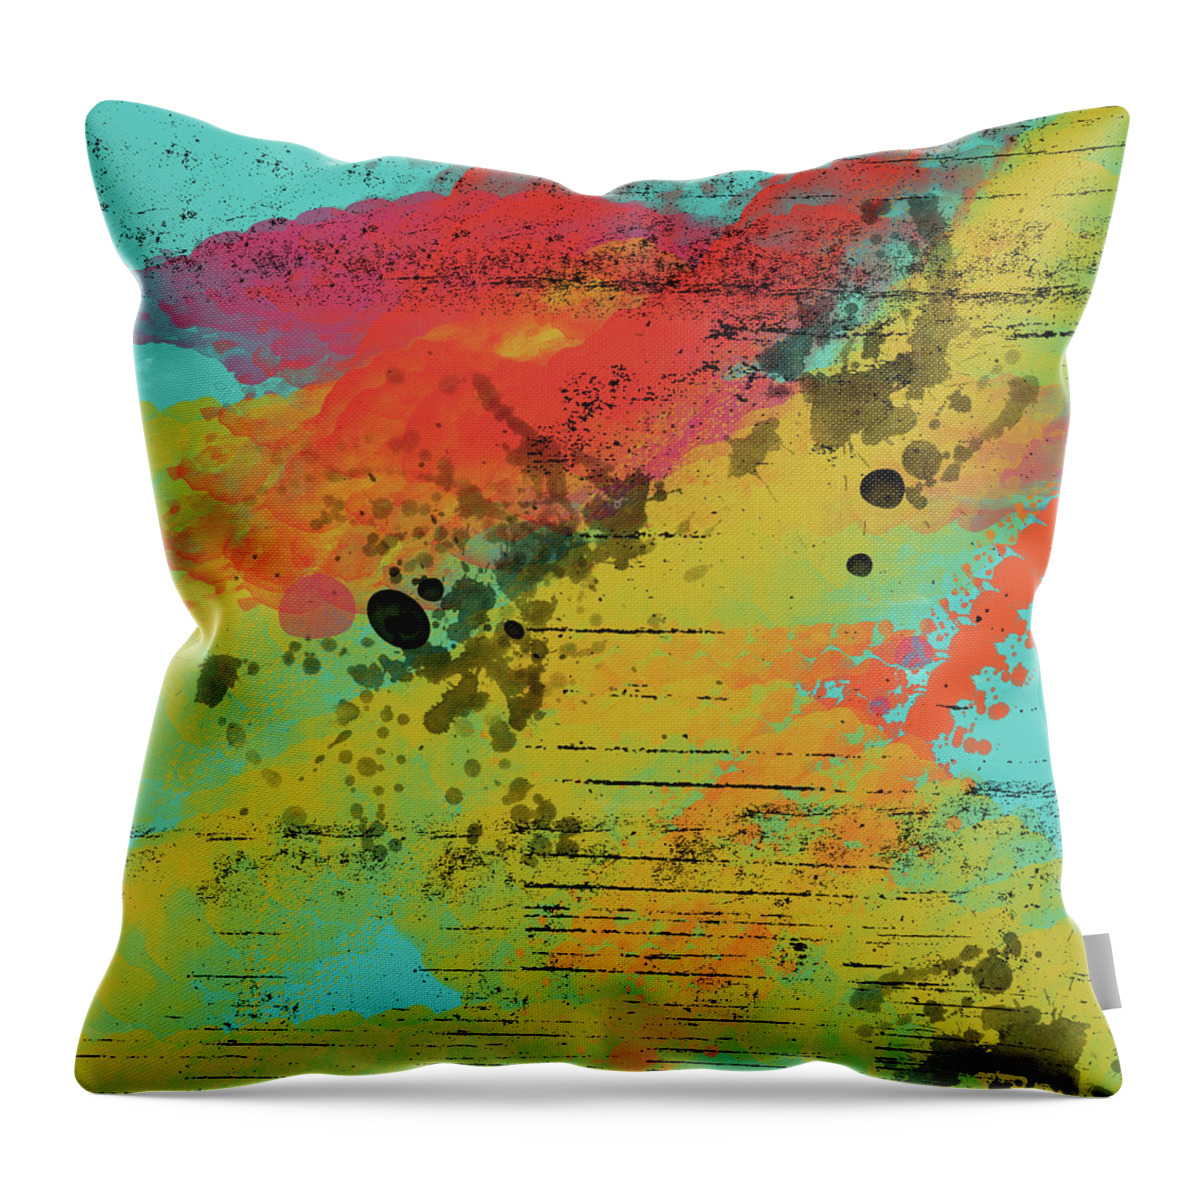 Summer Vibe Throw Pillow featuring the painting Summer Vibe by Kandy Hurley